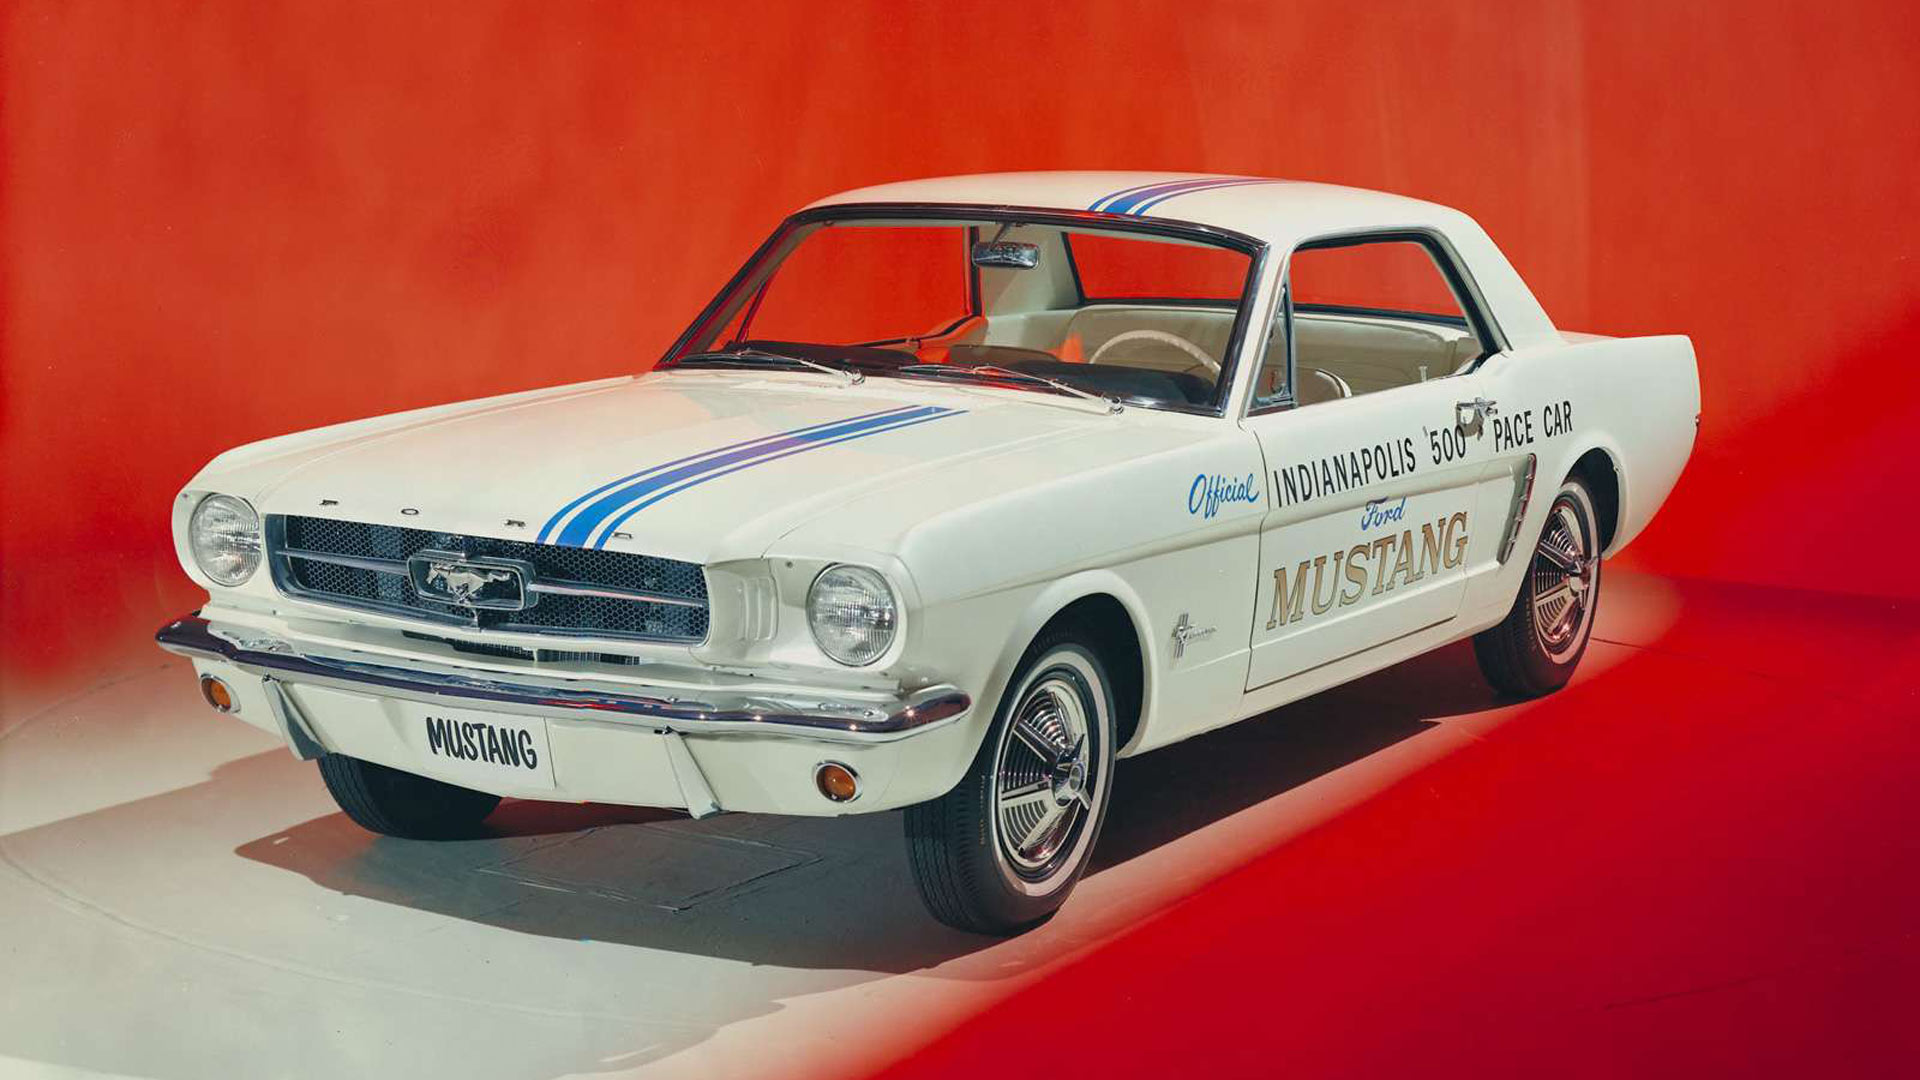 Indianapolis 500 pace car